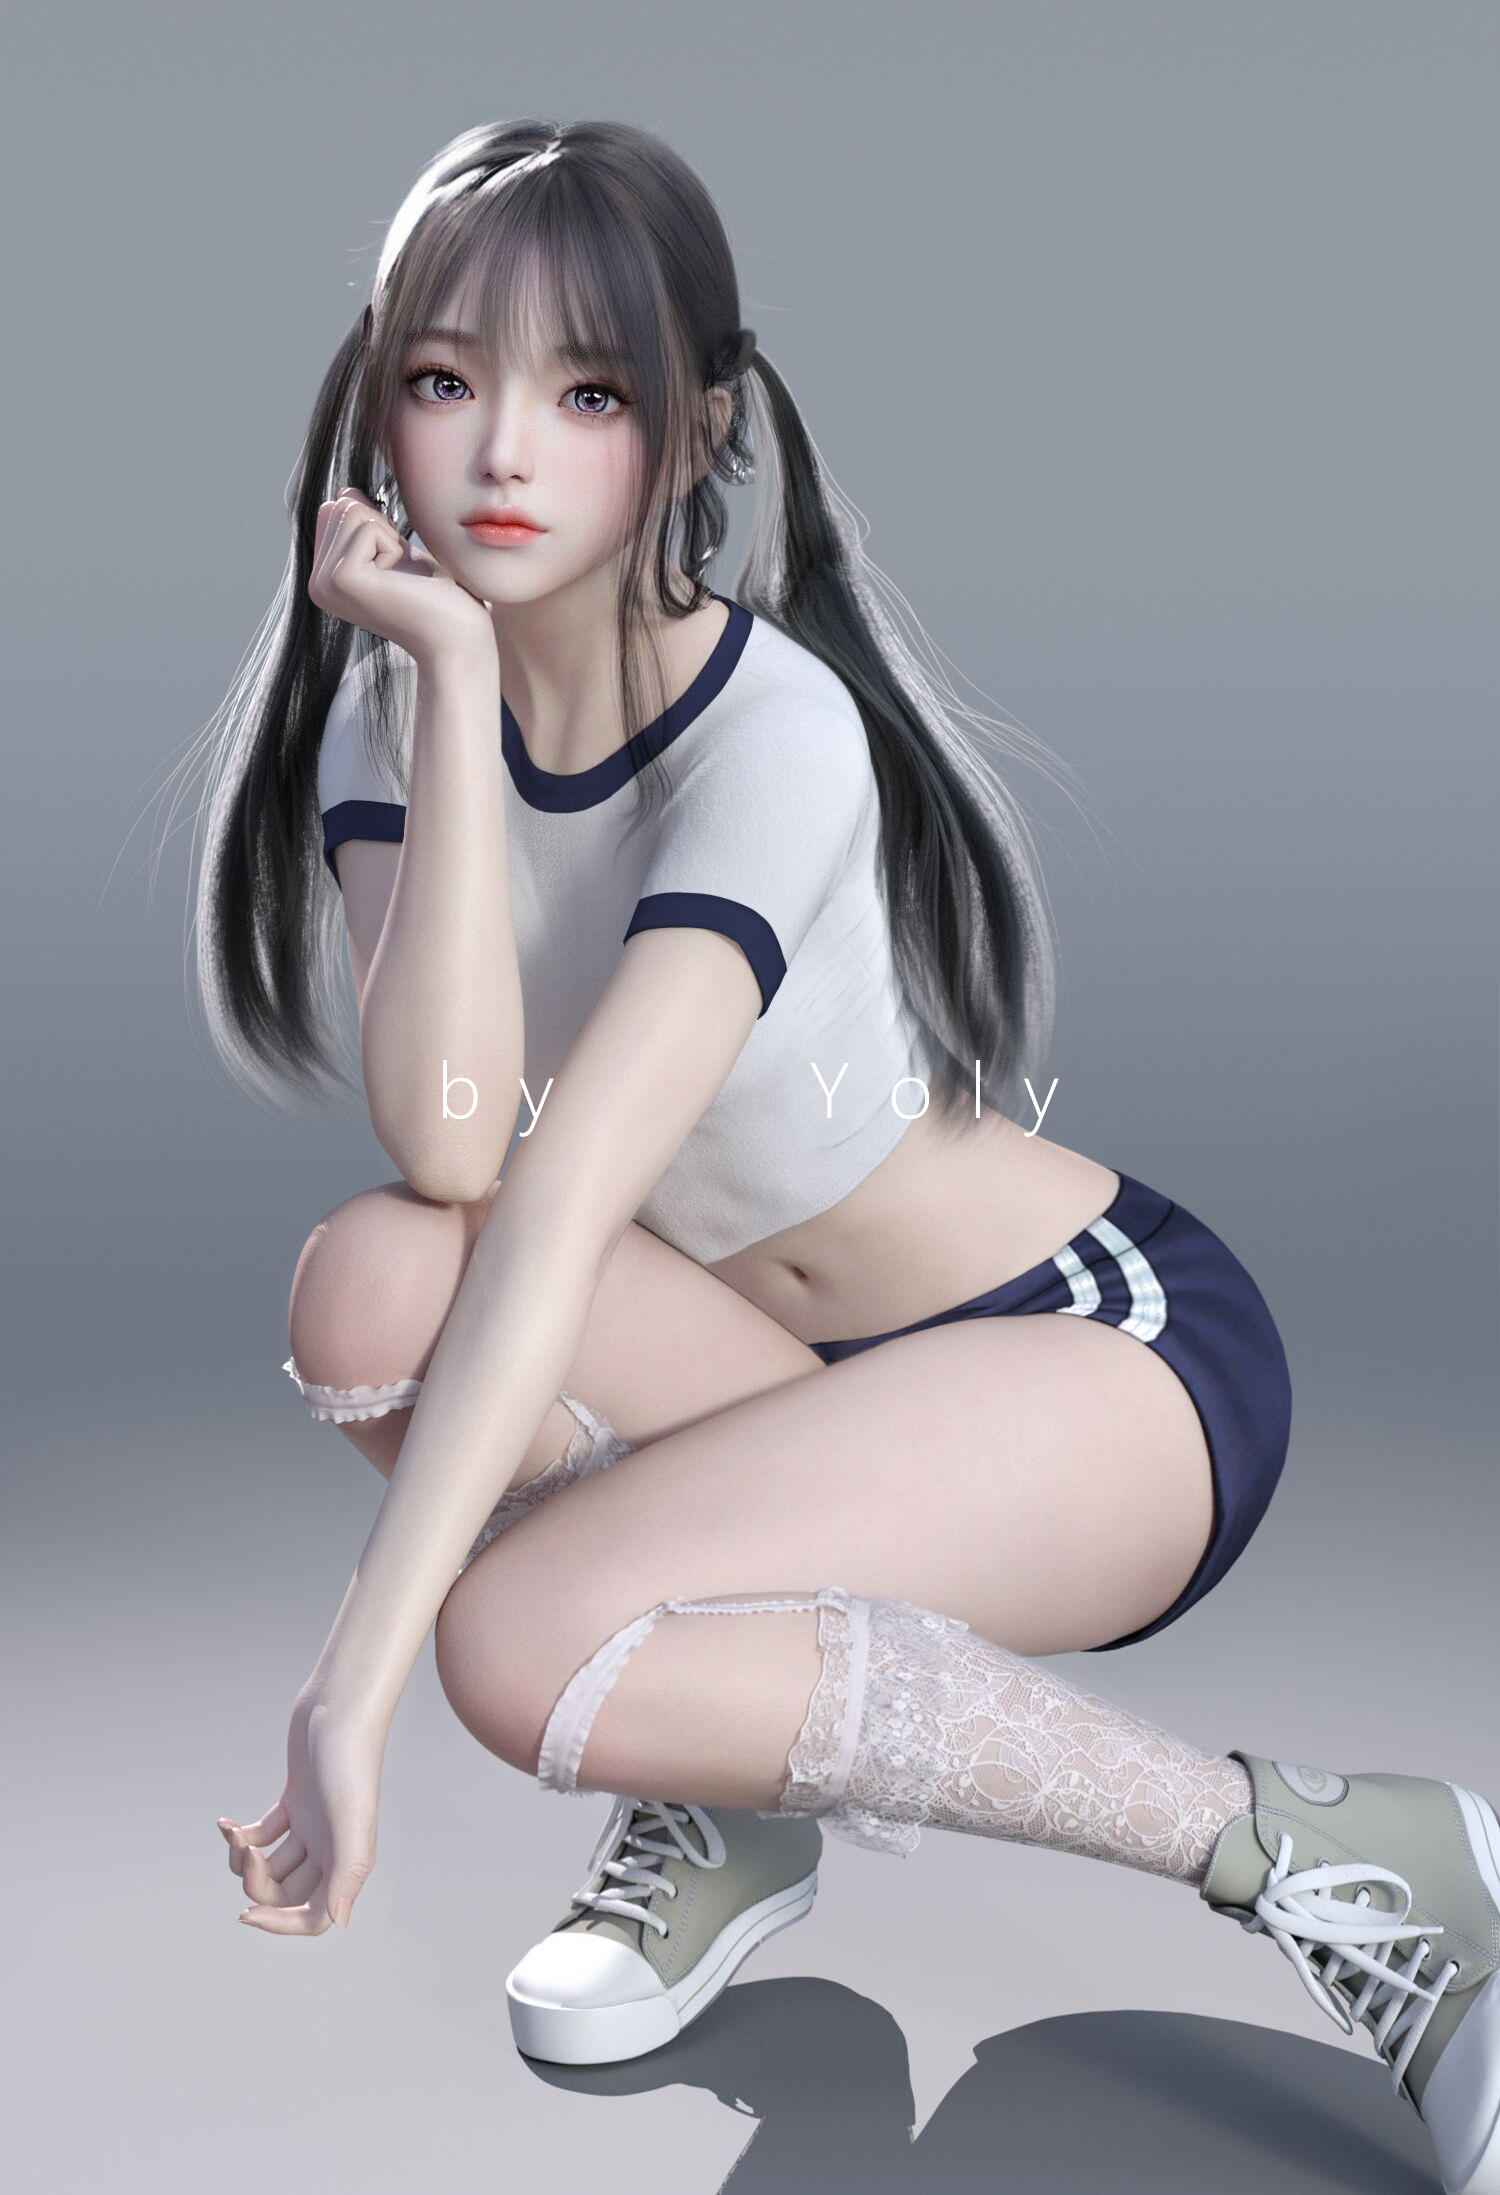 General 1500x2195 Asian women women indoors Yoly schoolgirl long hair squatting short shorts belly belly button twintails sportswear gym clothes